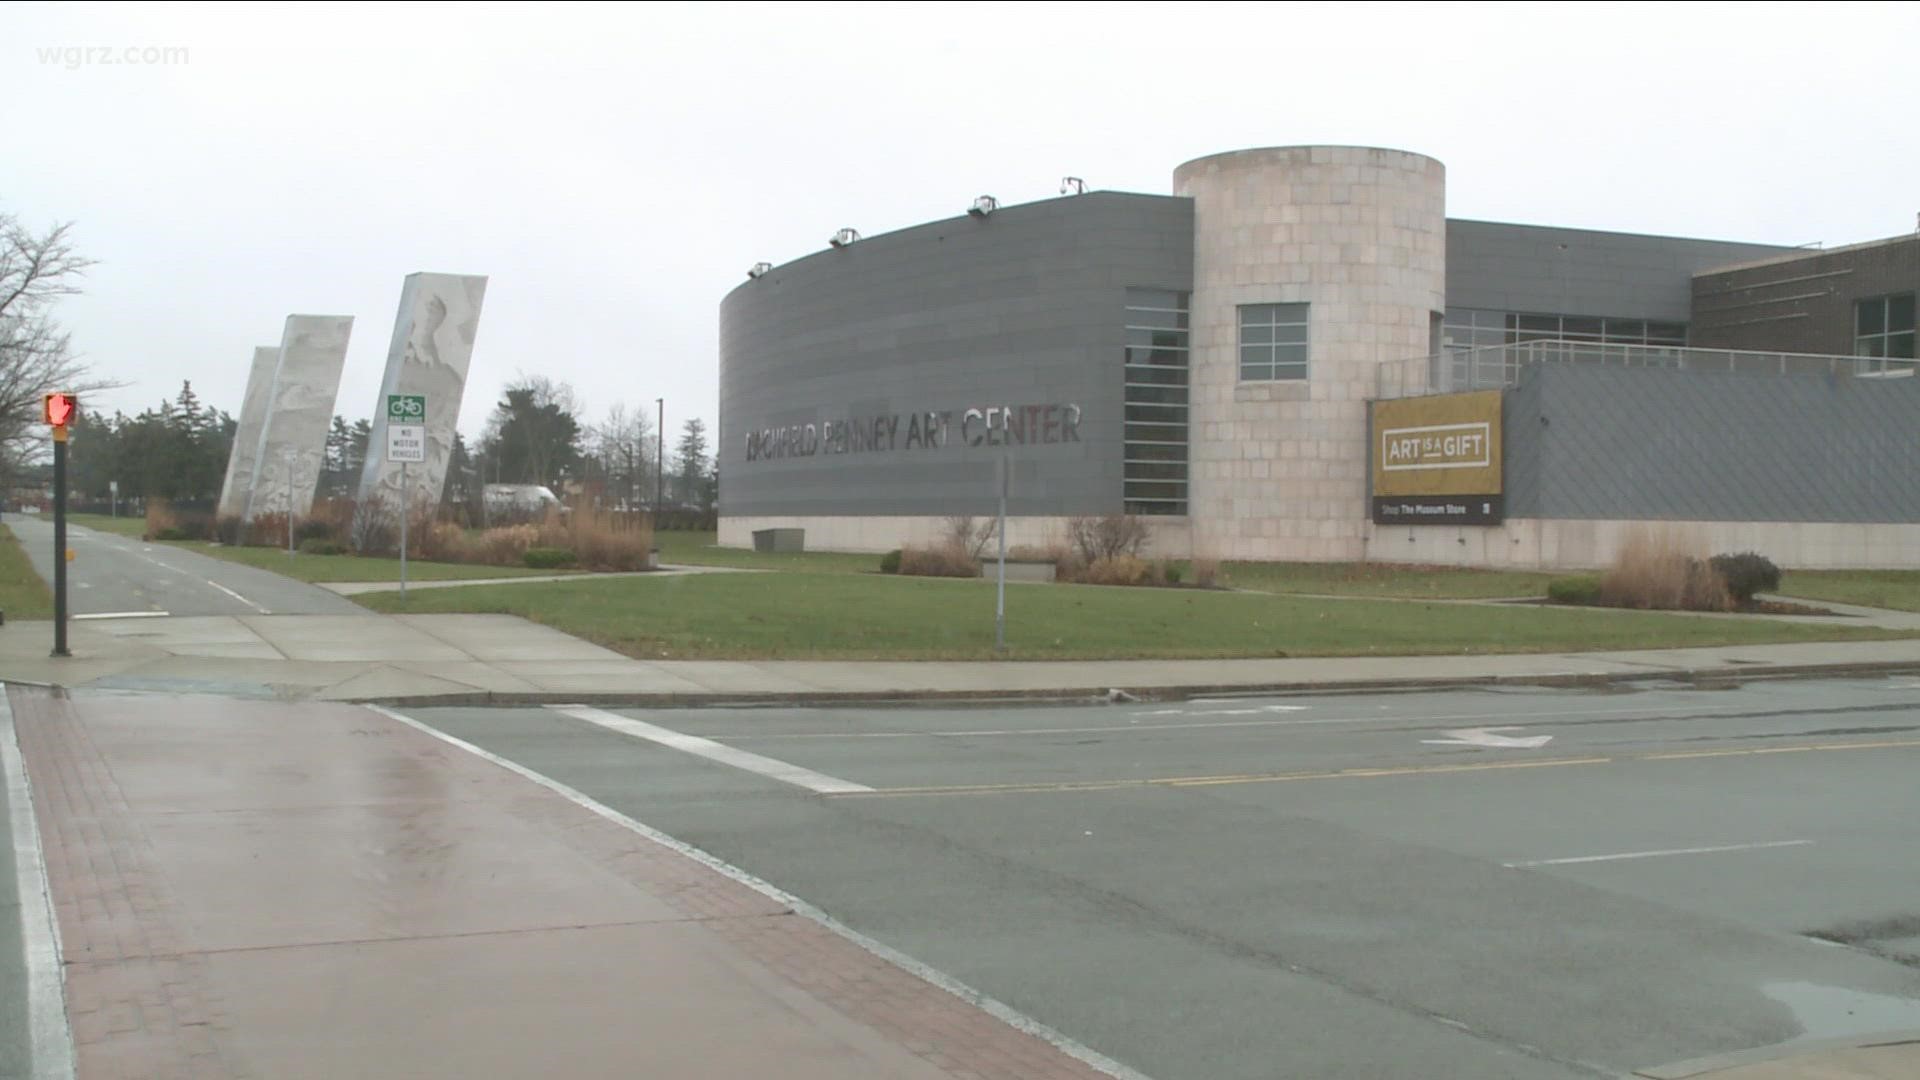 Burchfield Penny Art Center closing temporarily due to rise in Covid cases